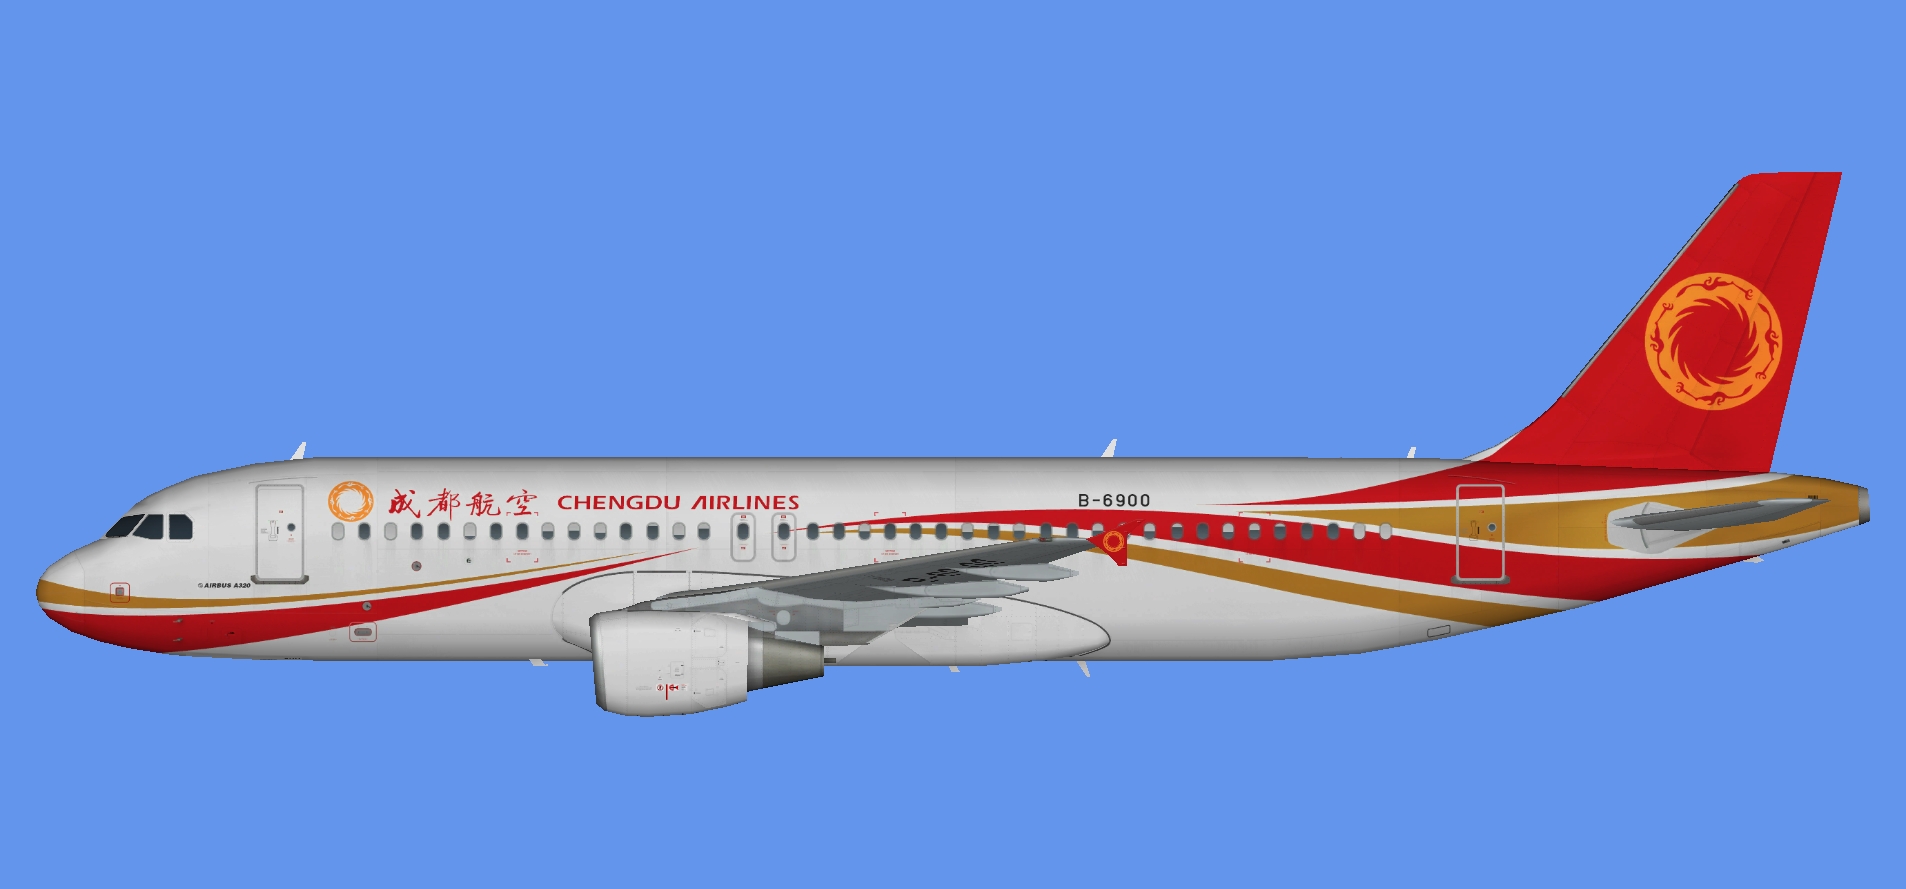 Chengdu Airlines A320